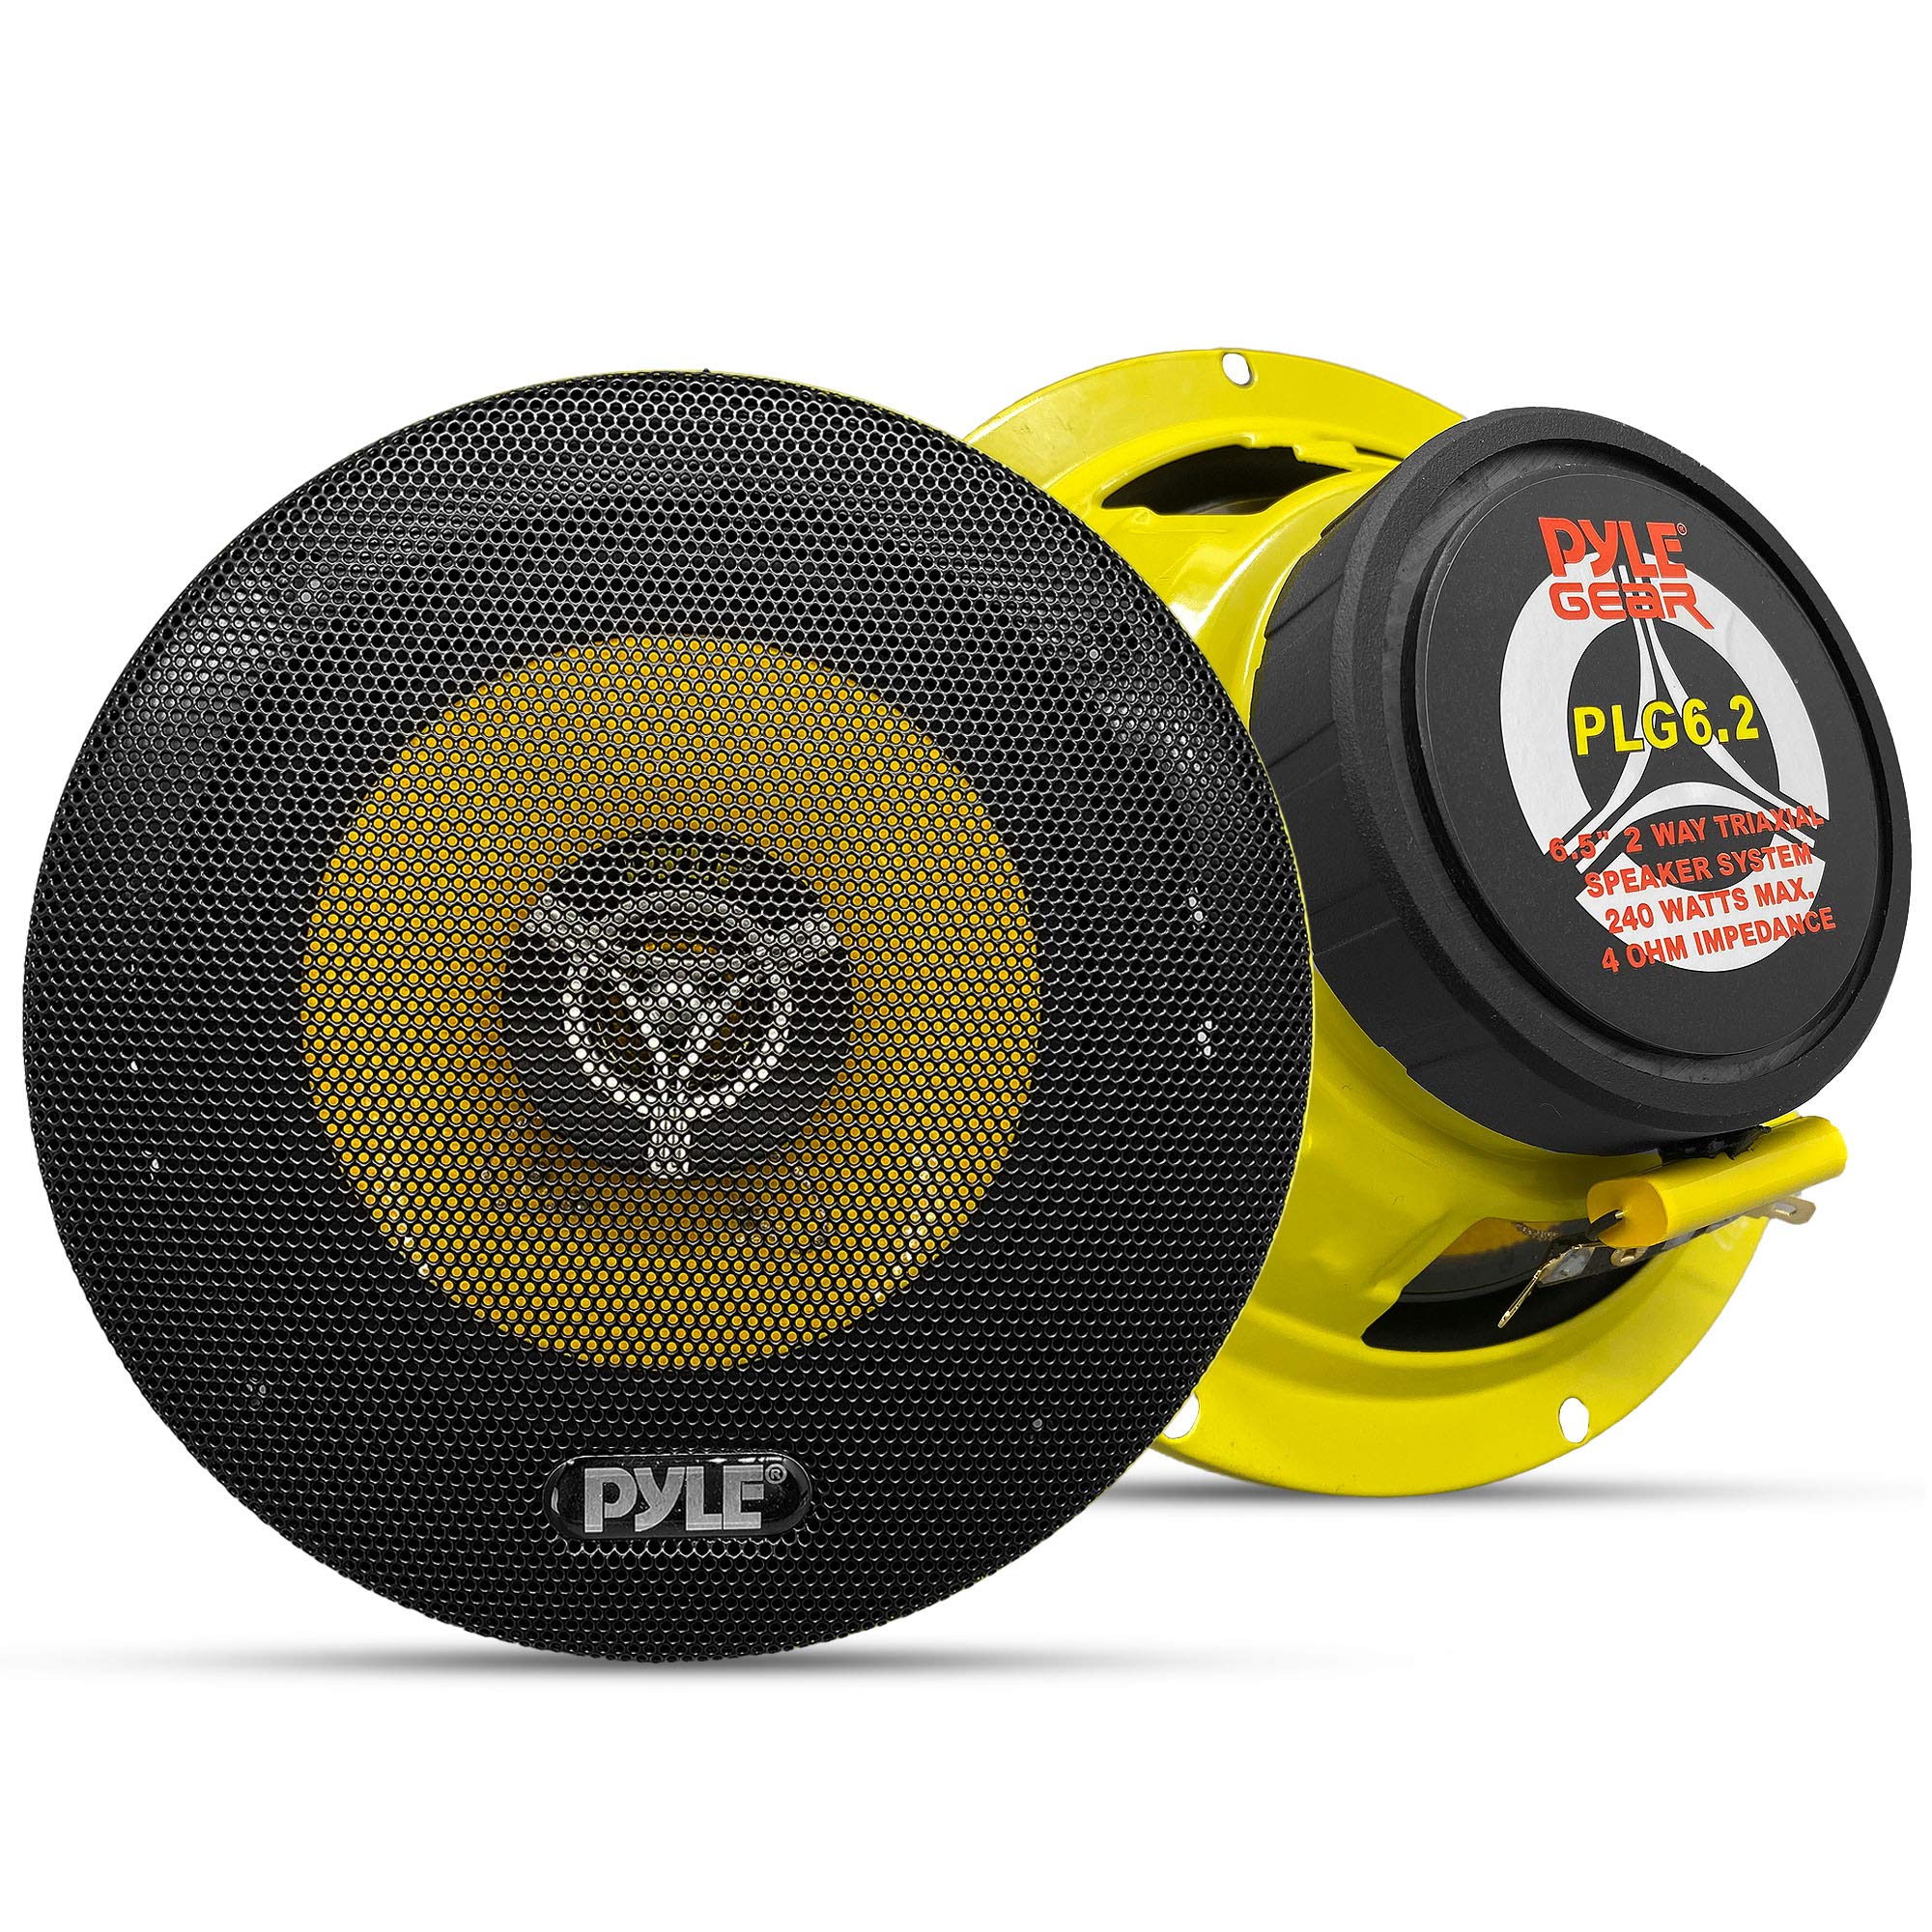 Pyle Car Two Way Speaker System - Pro 6.5 Inch 240 Watt 4 Ohm Mid Tweeter-Audio Sound Speakers For Car Stereo w/ 30 Oz Magnet Structure, 2.25” Mount Depth Fits Standard OEM -PLG6.2 (Pair) Yellow